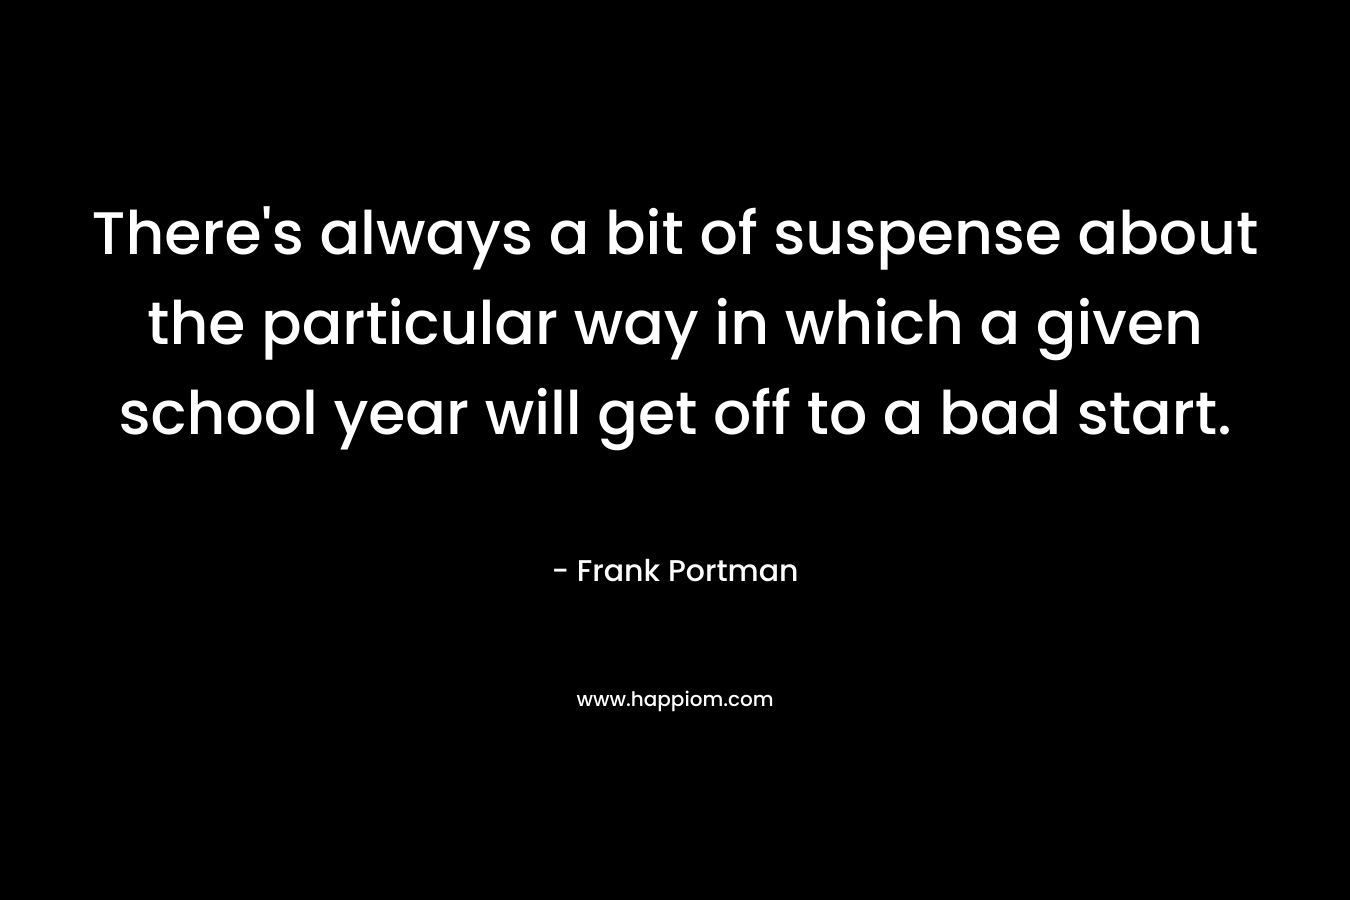 There’s always a bit of suspense about the particular way in which a given school year will get off to a bad start. – Frank Portman